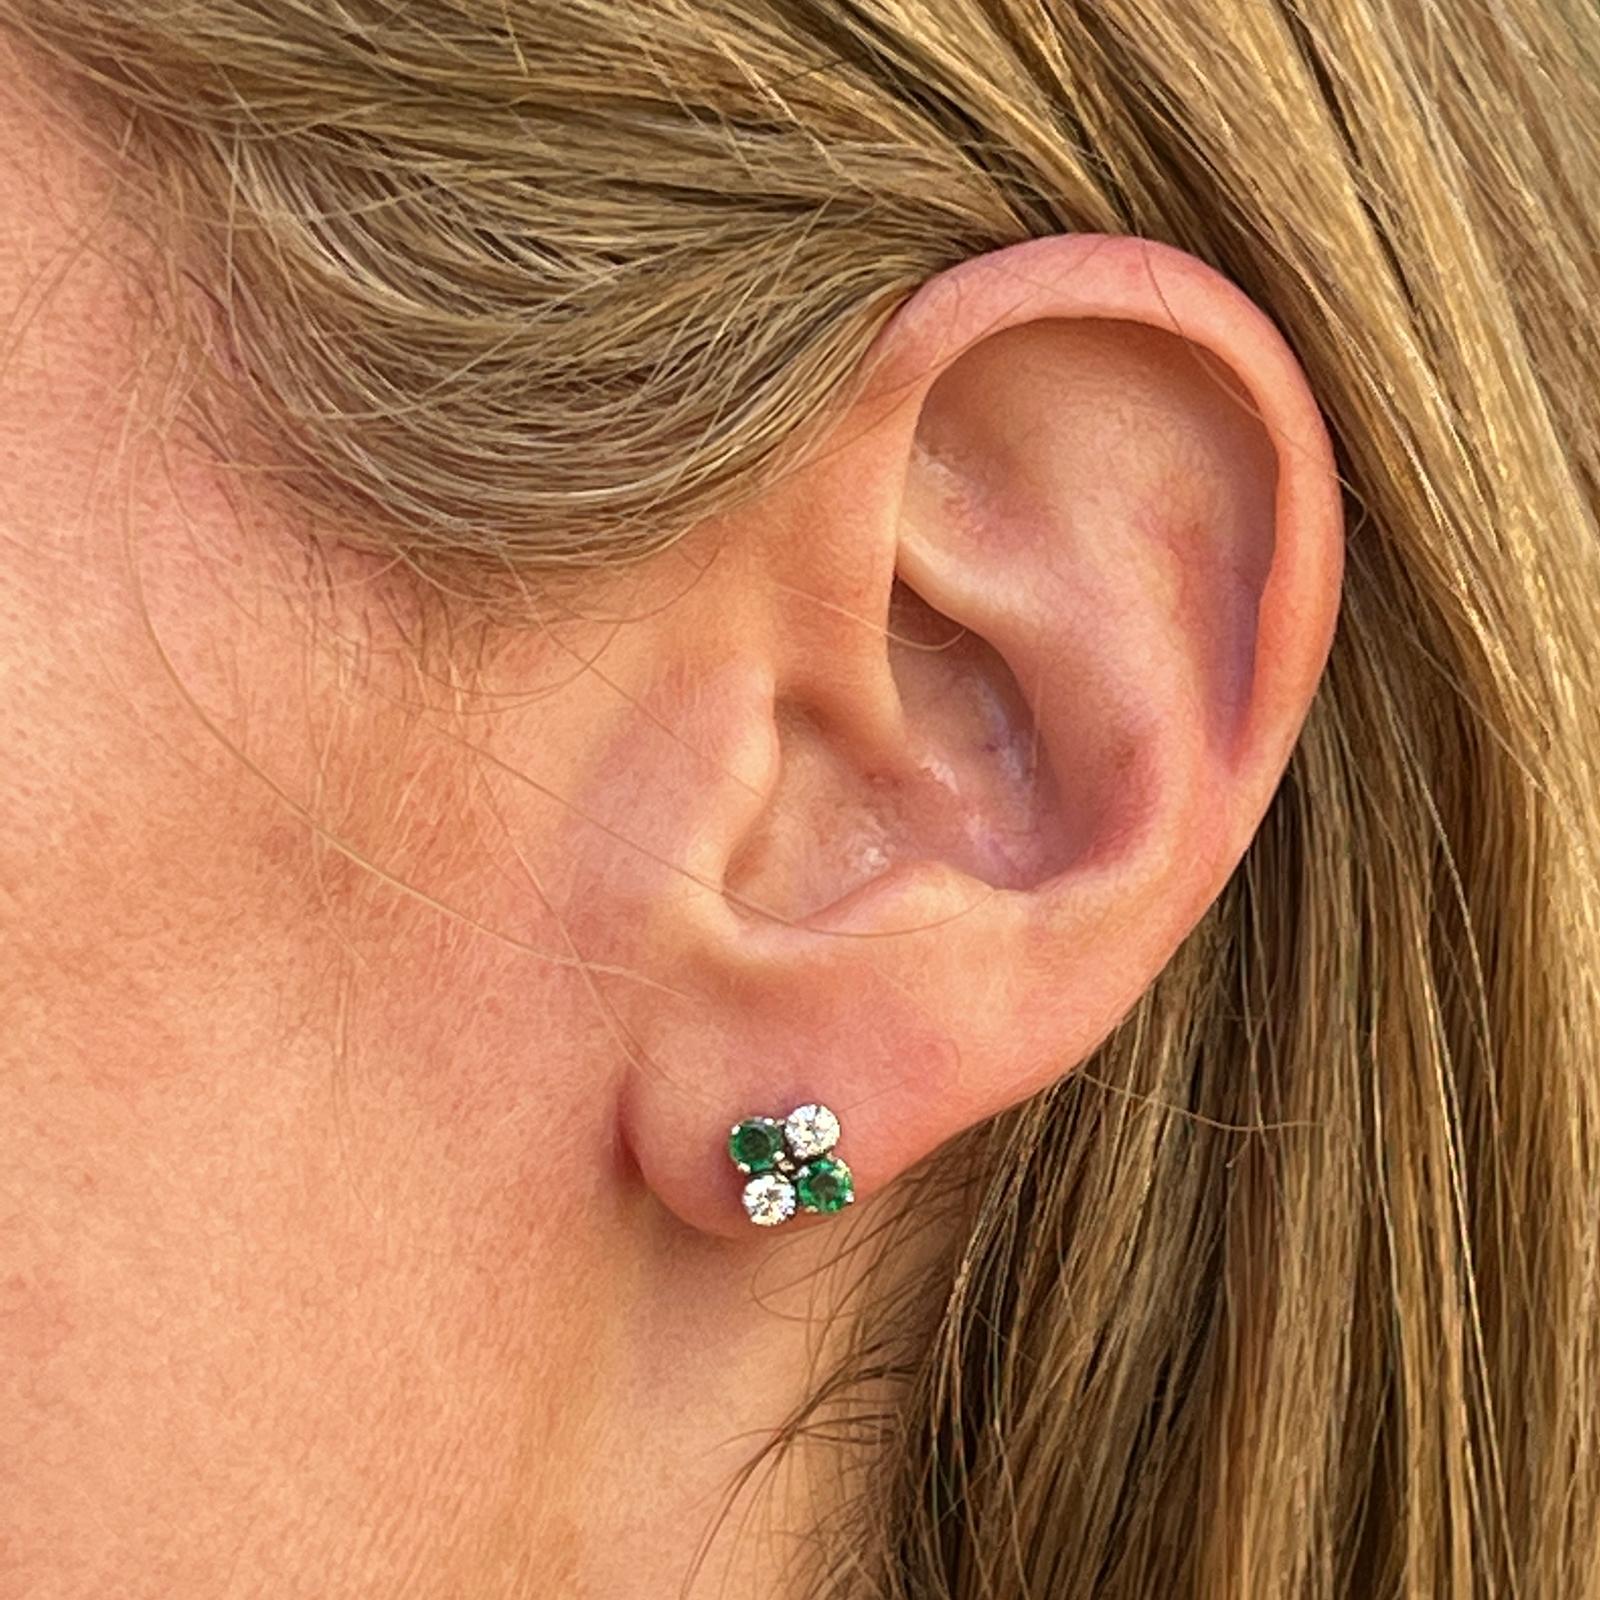 Diamond and emerald stud earrings crafted in 18 karat white gold. The studs feature 4 round natural emeralds and 4 round brilliant cut diamonds weighing approximately .40 carat total weight. The diamolnds are graded G-H color and VS2-SI1 clarity.